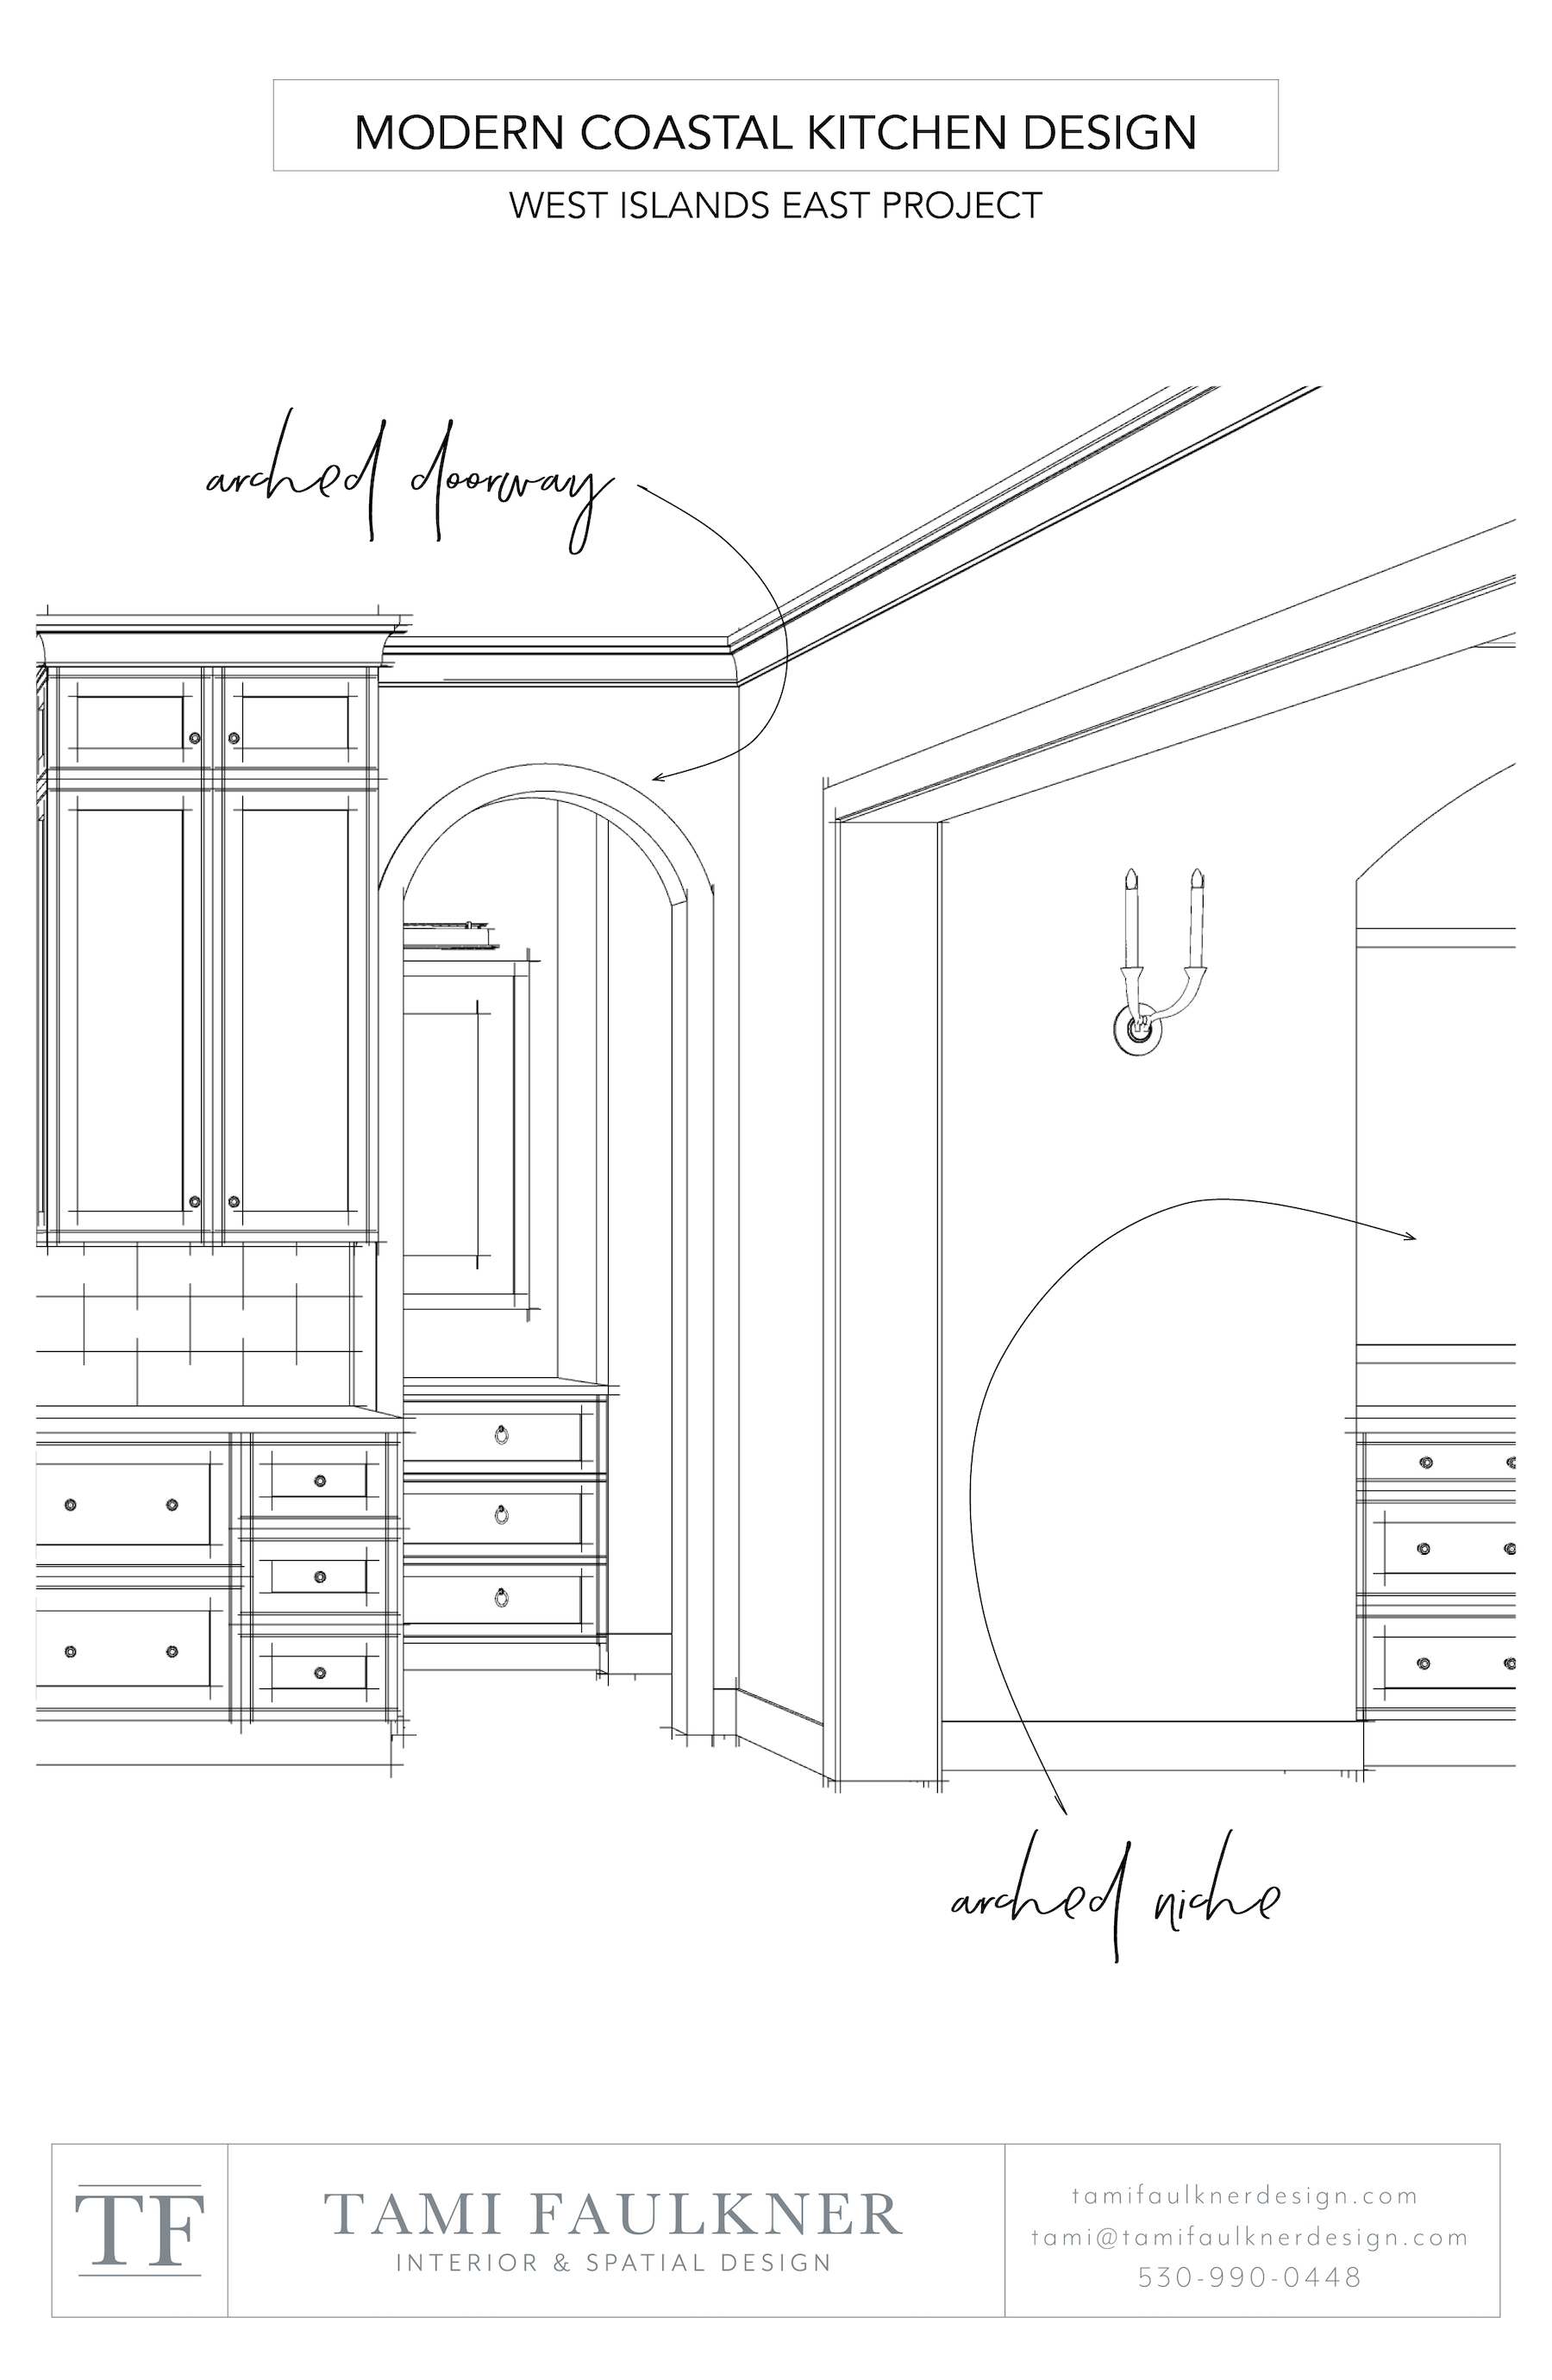 FIVE THINGS TO THINK ABOUT BEFORE ADDING ARCHES TO YOUR DESIGN